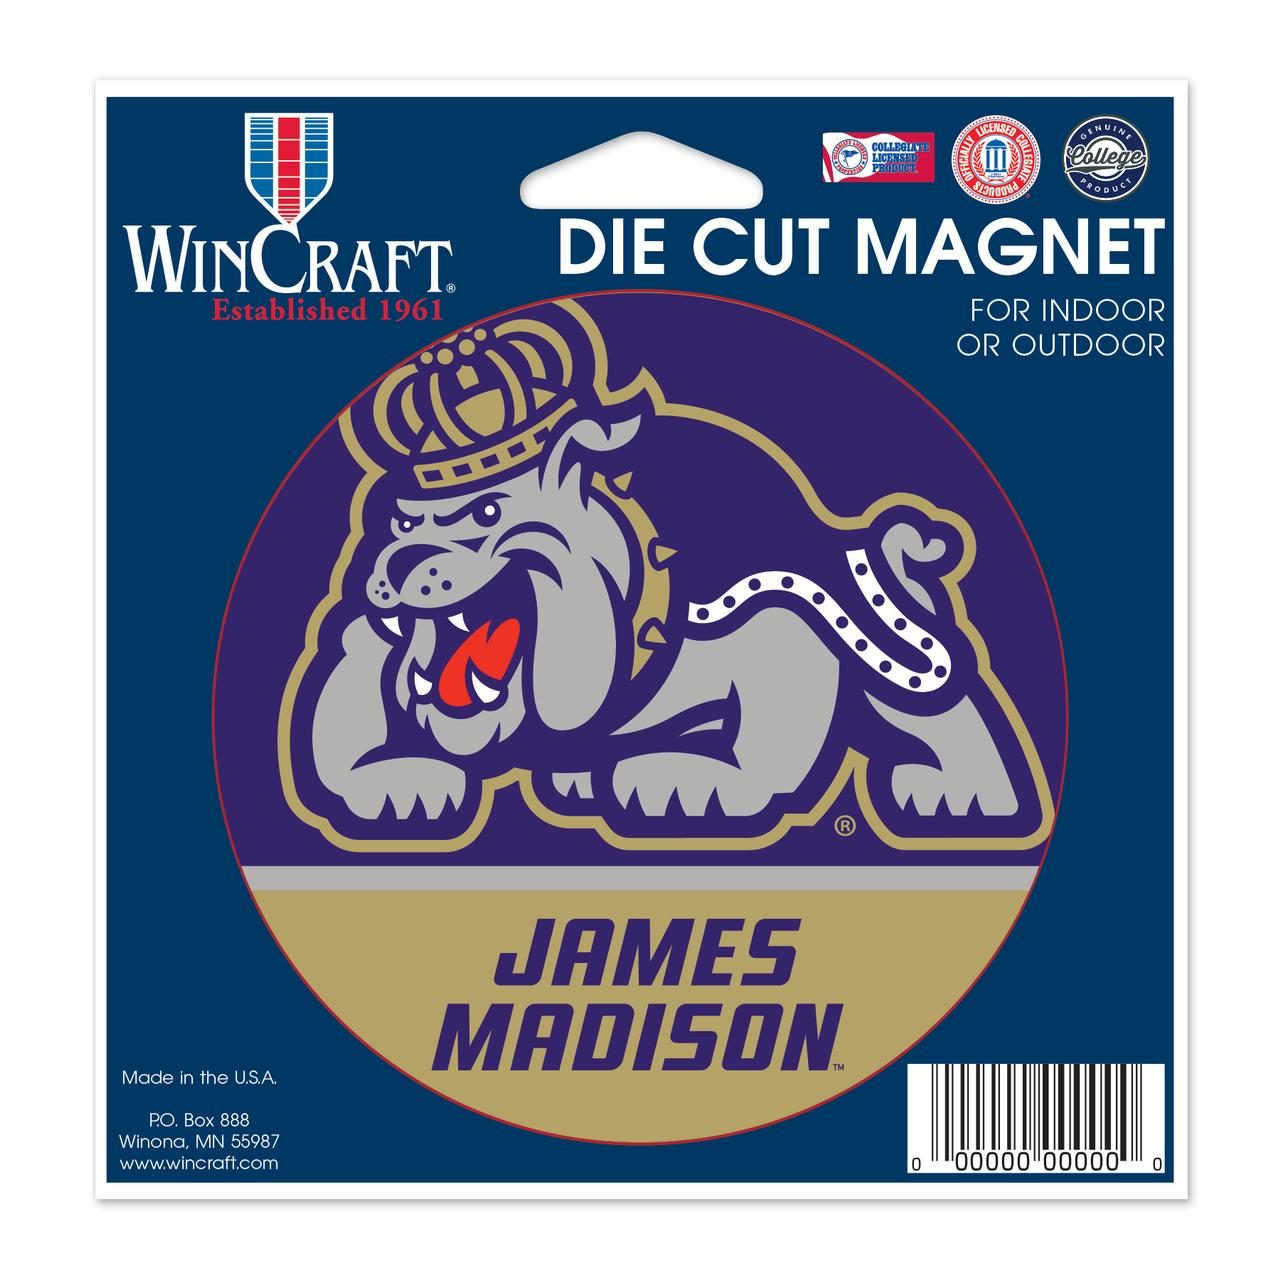 James Madison Dukes Official NCAA 4.5 inch x 6 inch  Car Magnet by Wincraft - image 1 of 1